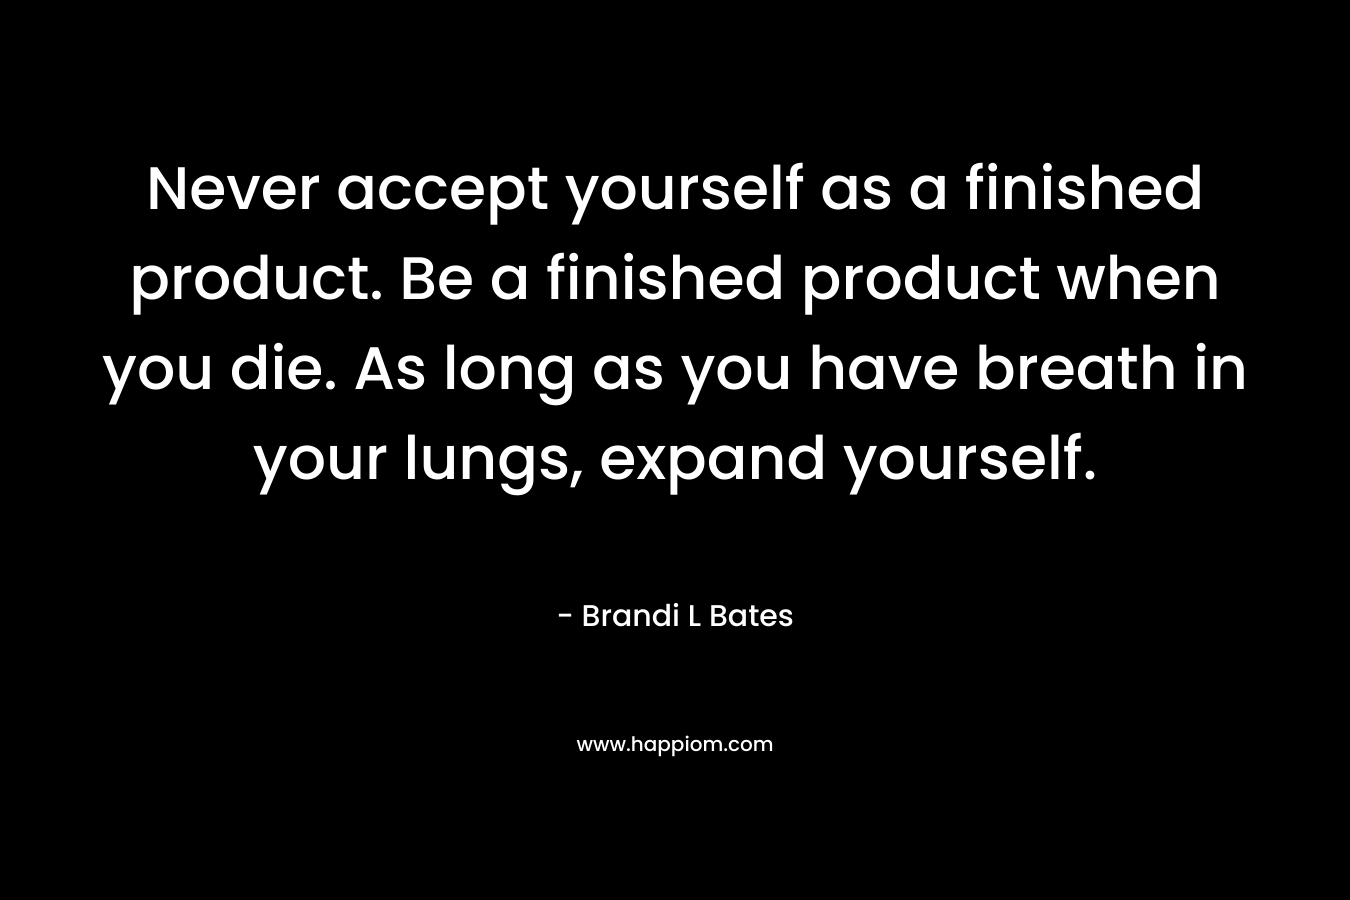 Never accept yourself as a finished product. Be a finished product when you die. As long as you have breath in your lungs, expand yourself. – Brandi L Bates